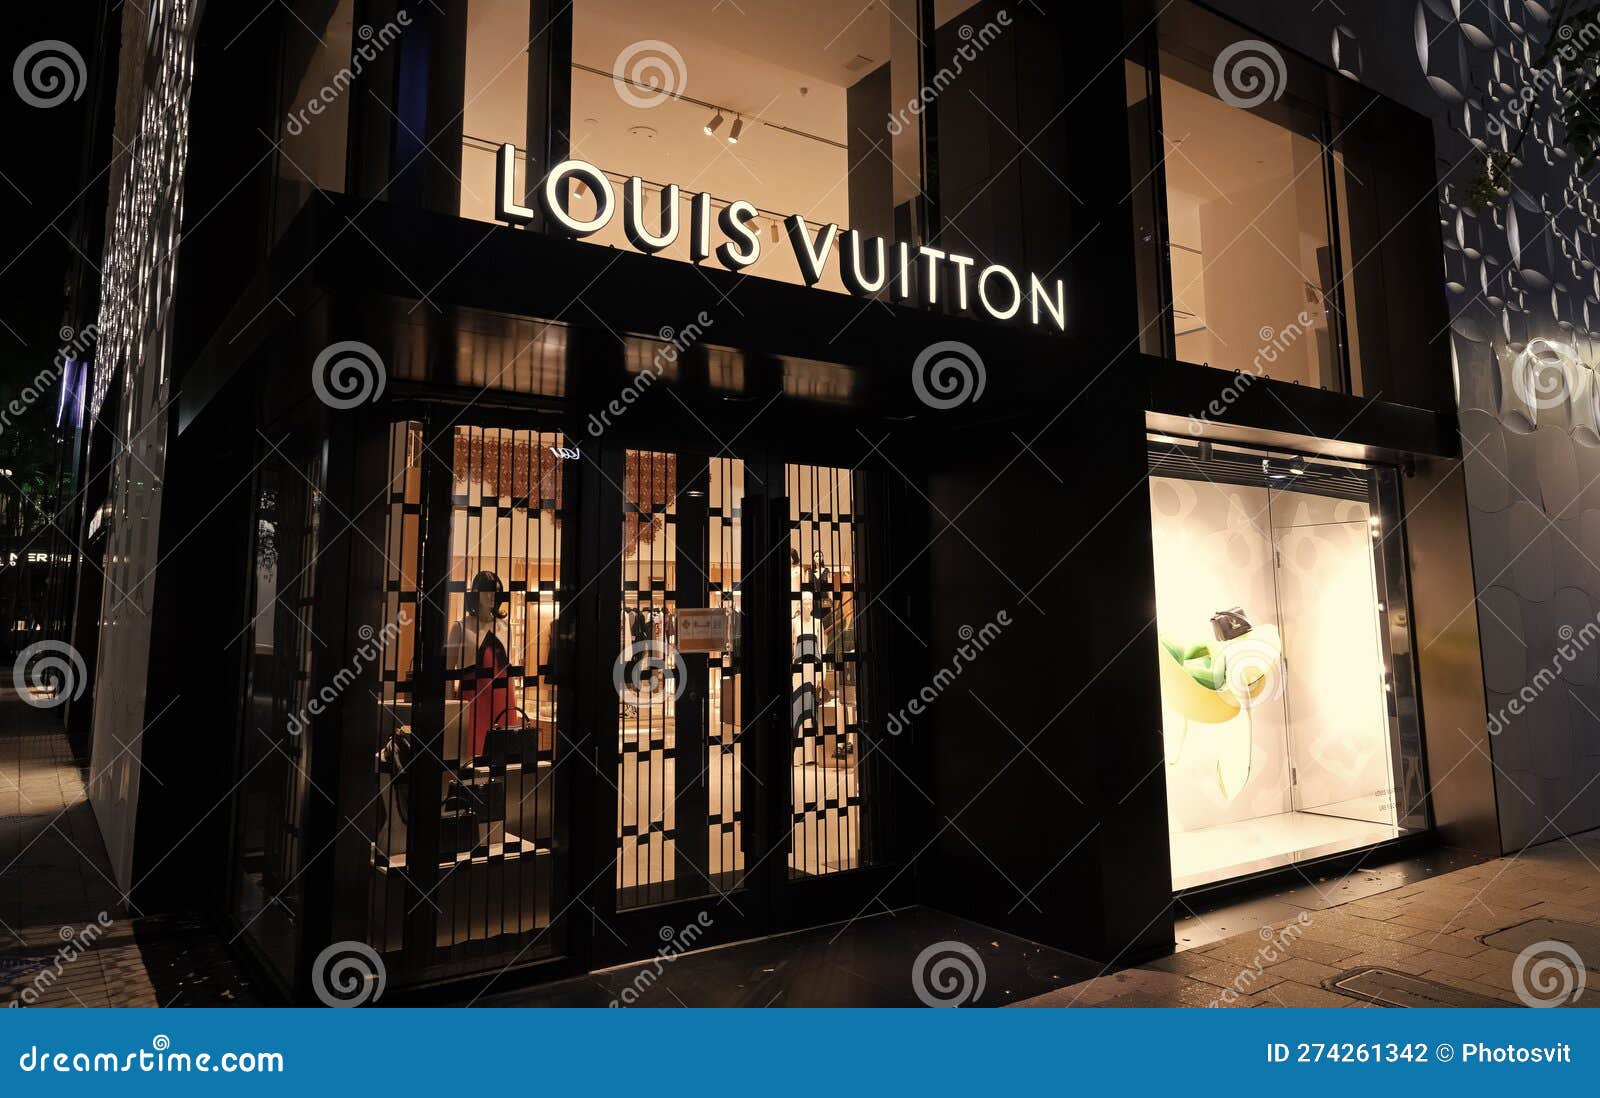 Miami, USA - March 20, 2021: Louis Vuitton Name Lit Up Over Shopfront at Design  District in Florida Editorial Photography - Image of shopfront, outlet:  274261342